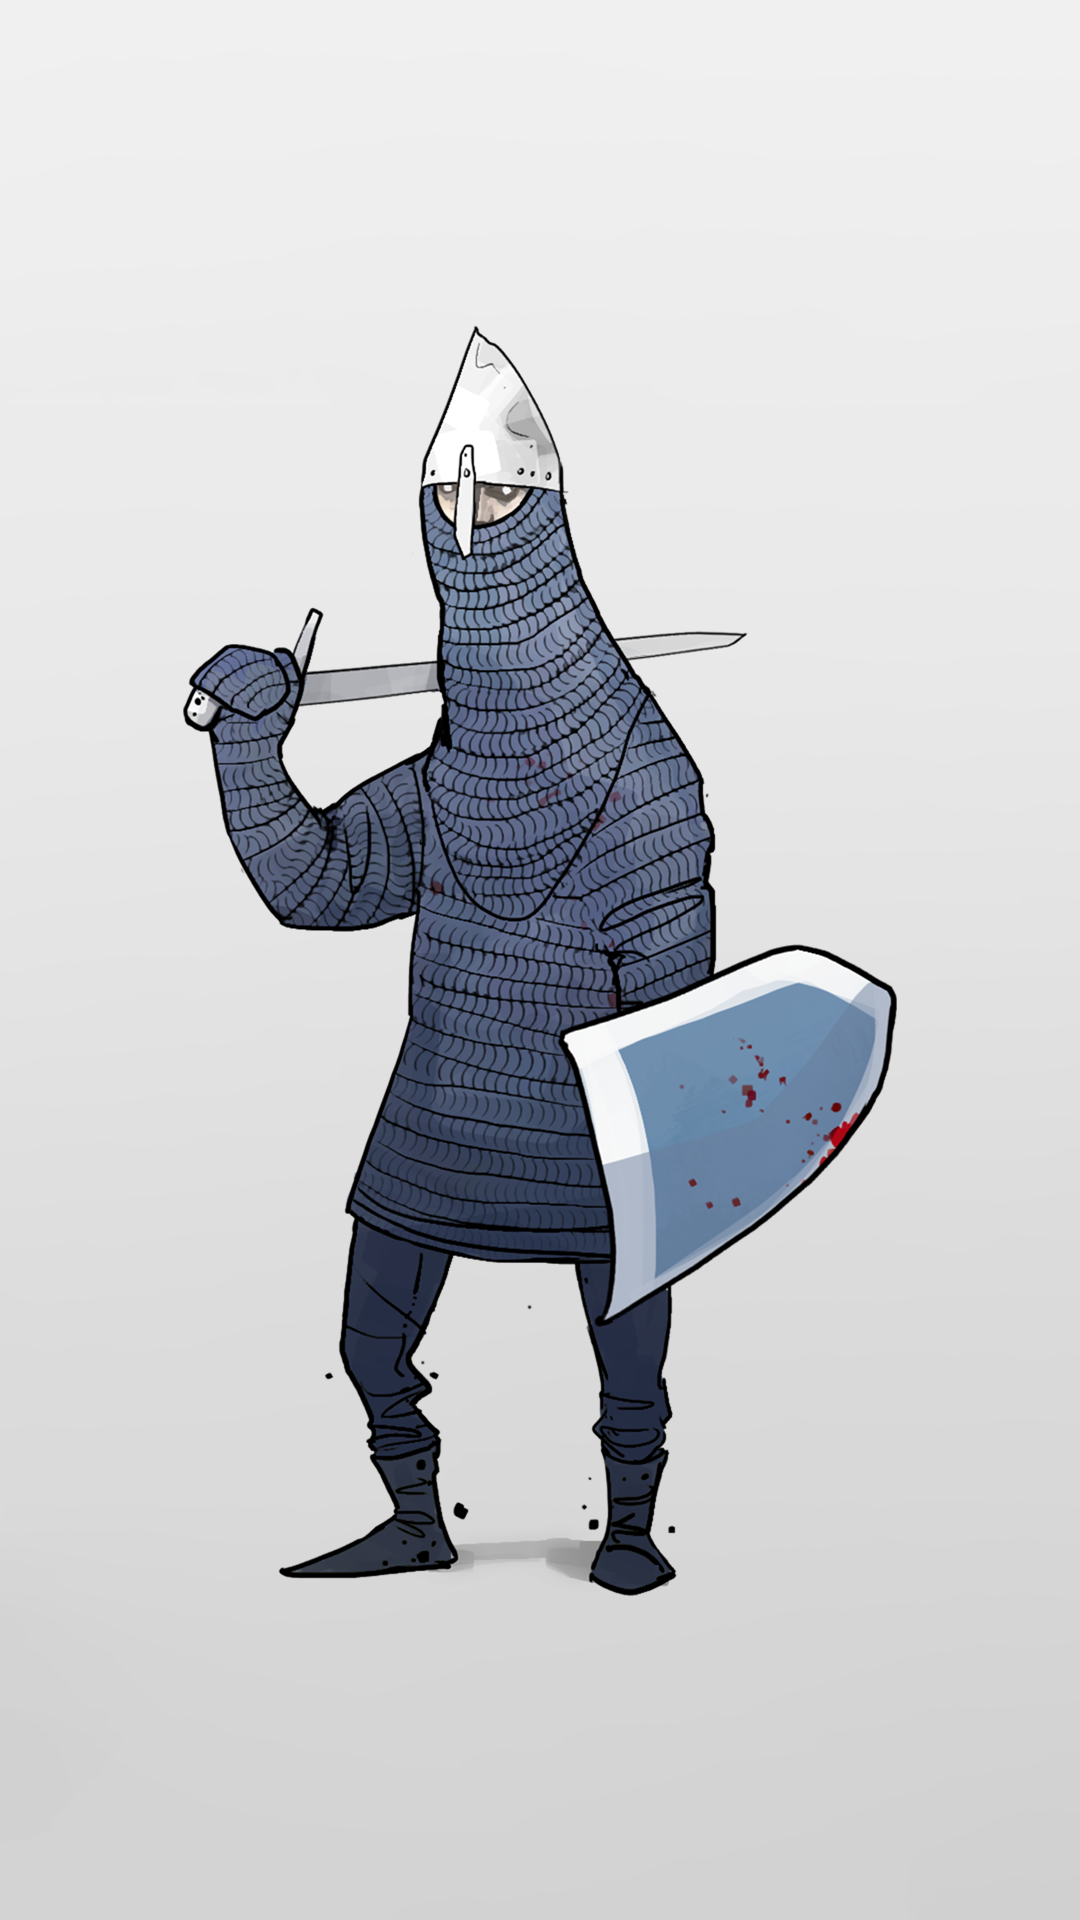 Illustration of a knight from Bad North game, with sword and shield in hand, designed as a phone wallpaper.